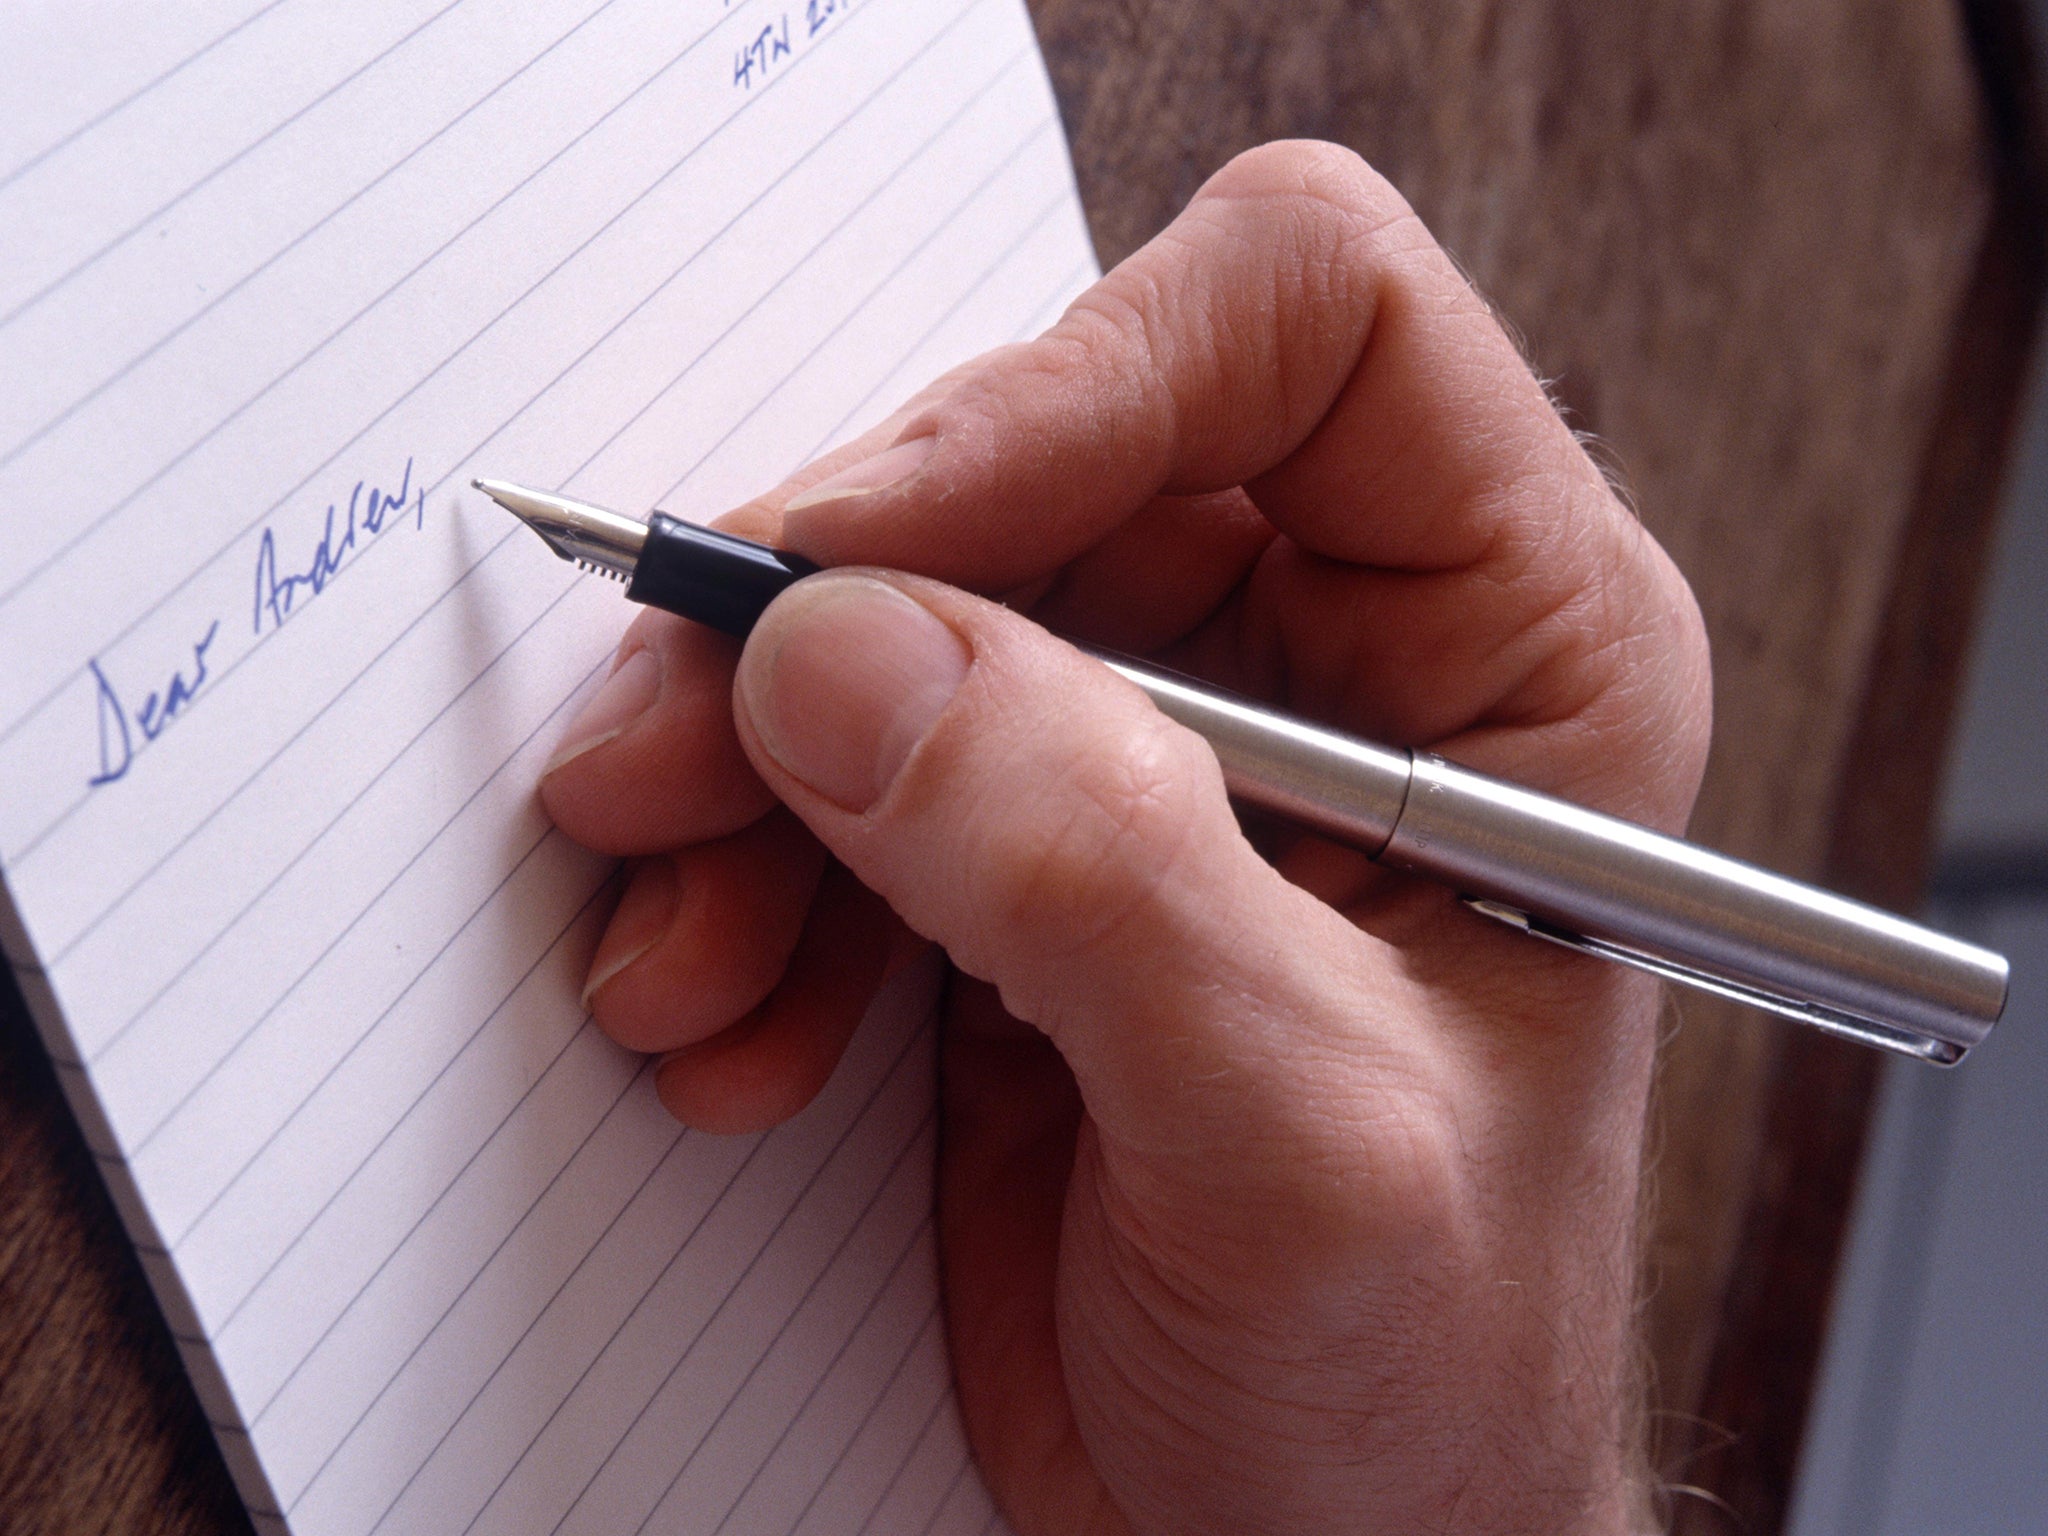 Handwriting is the face of a person out of sight, as distinctive as their gait, their features or their dress